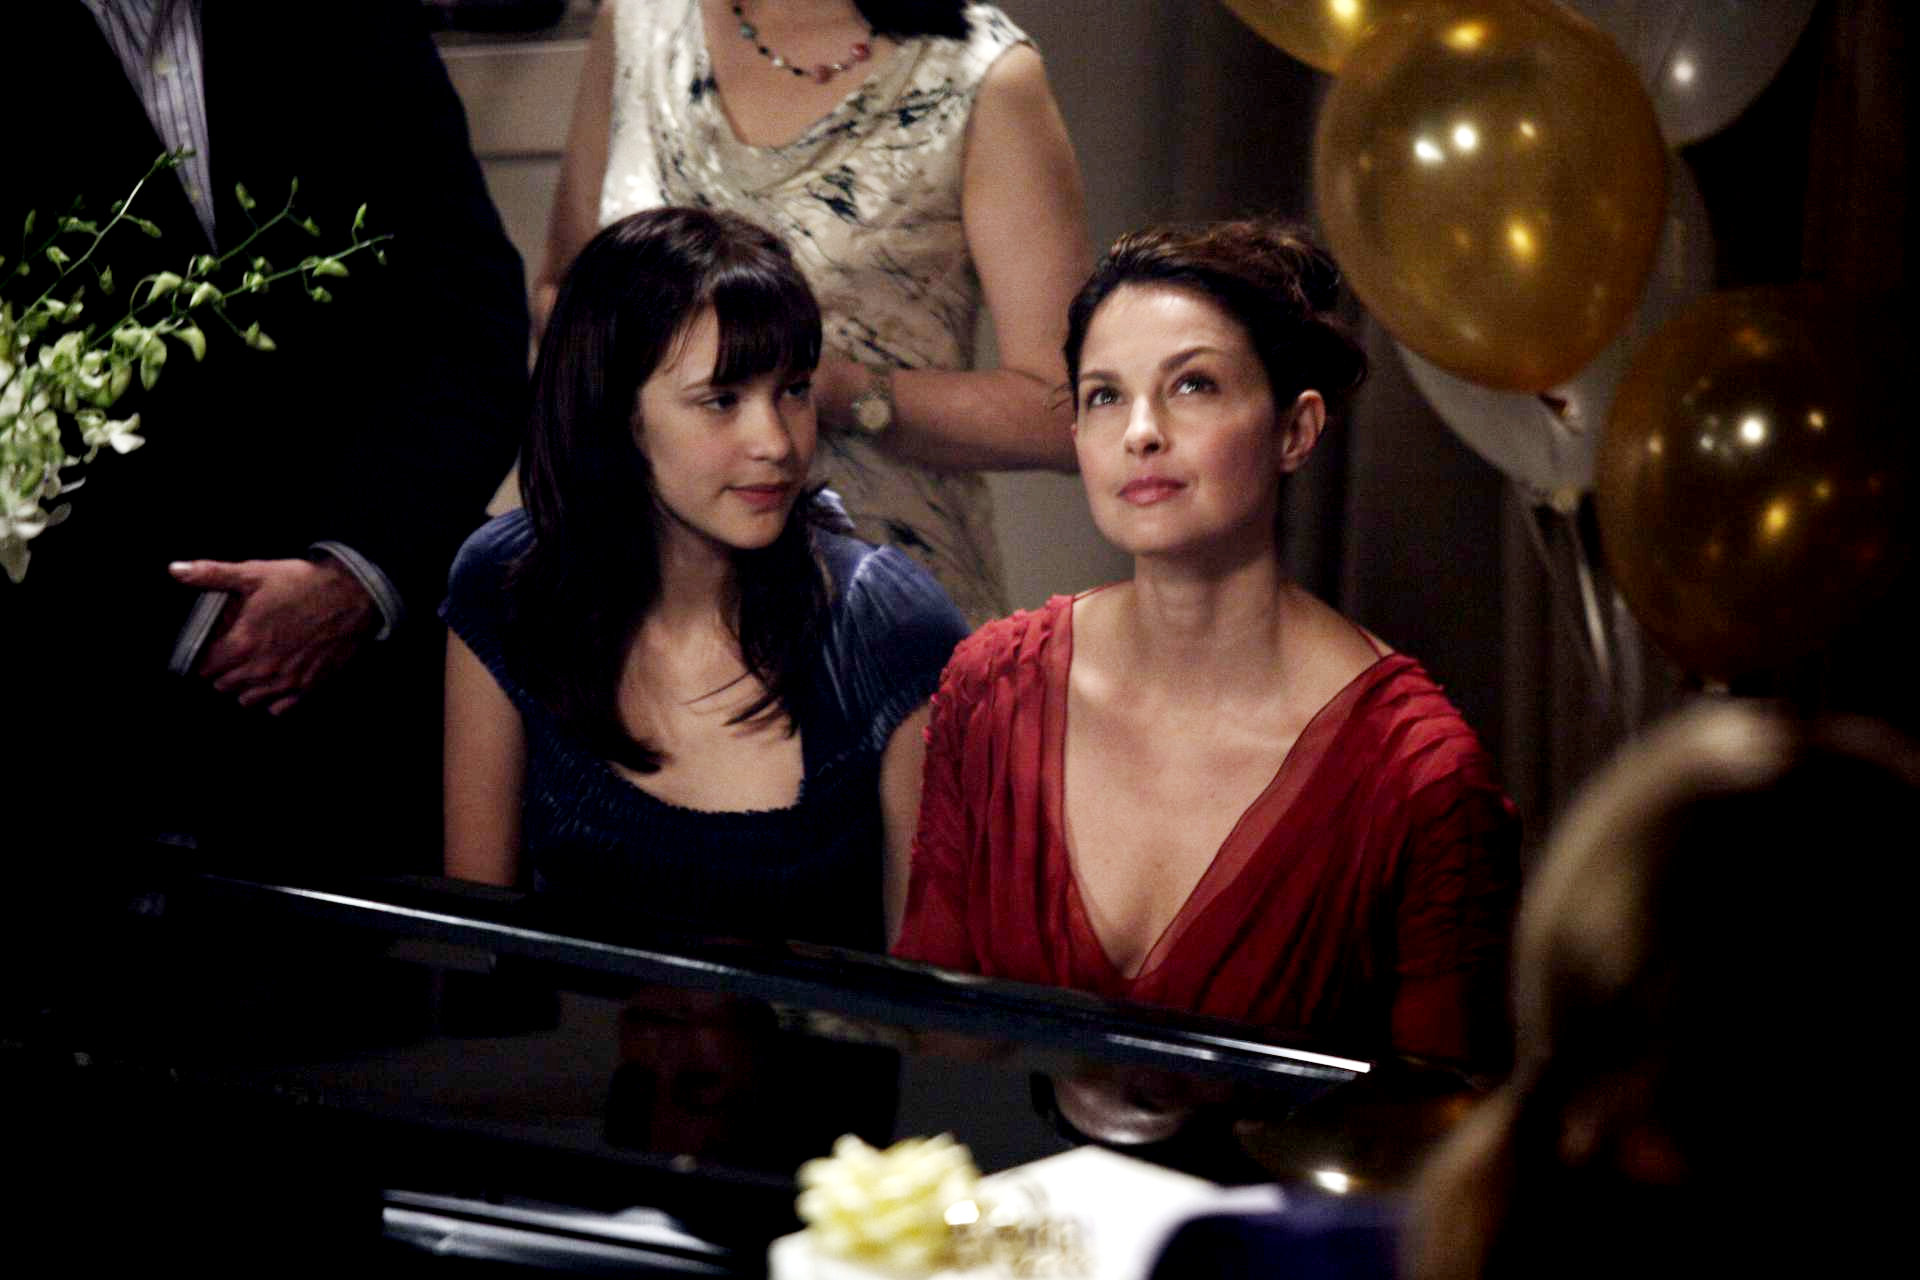 Alexia Fast stars as Julie and Ashley Judd stars as Helen in E1 Entertainment's Helen (2010)